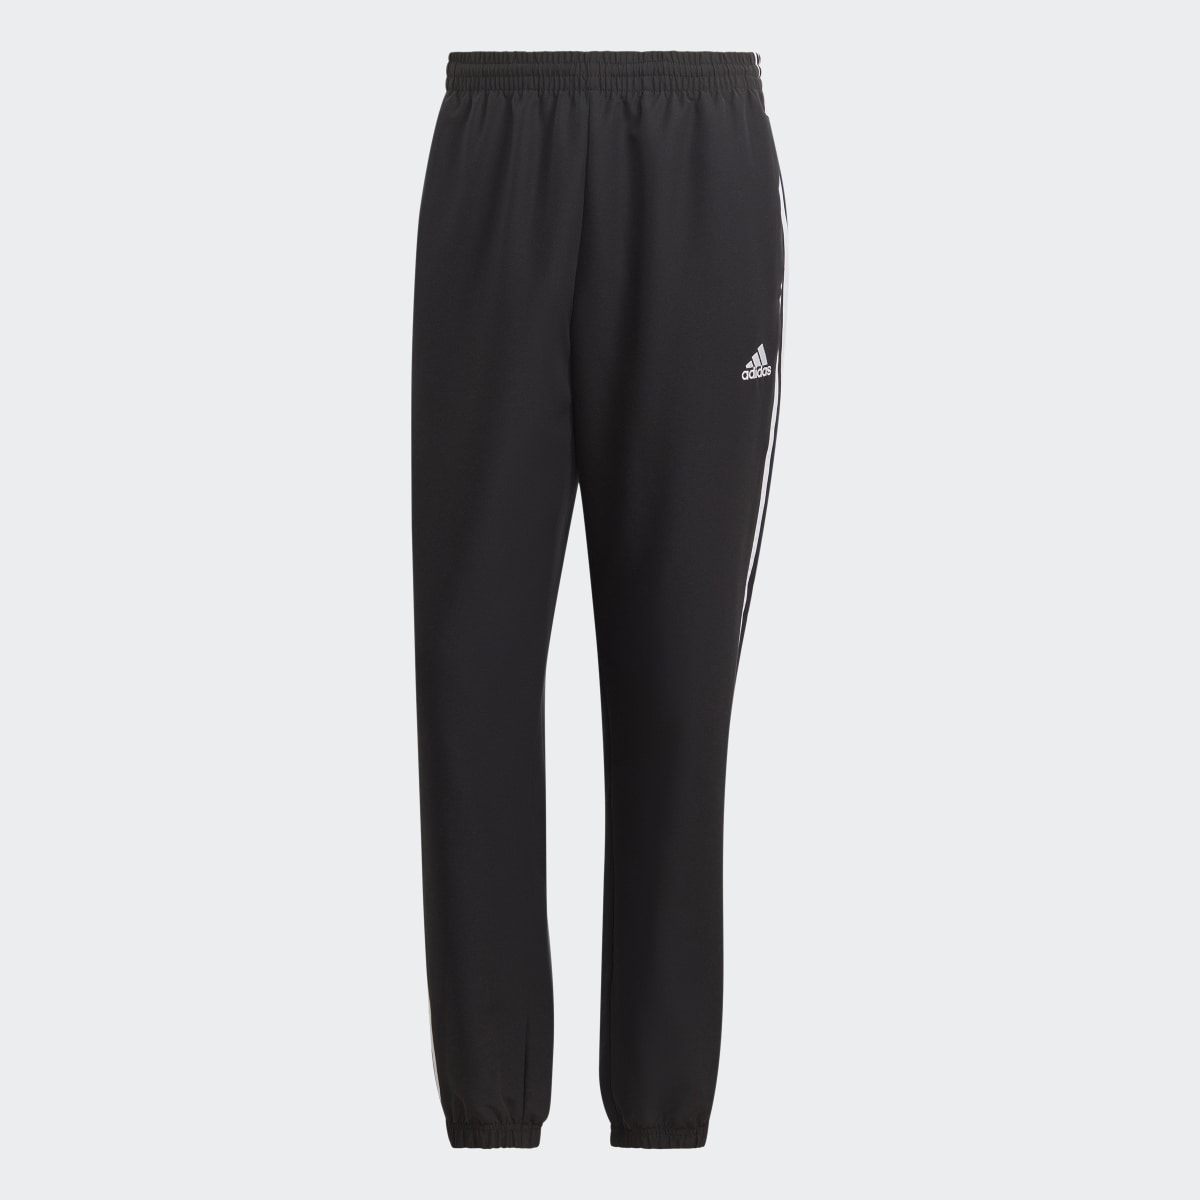 Adidas 3-Stripes Woven Tracksuit. 7